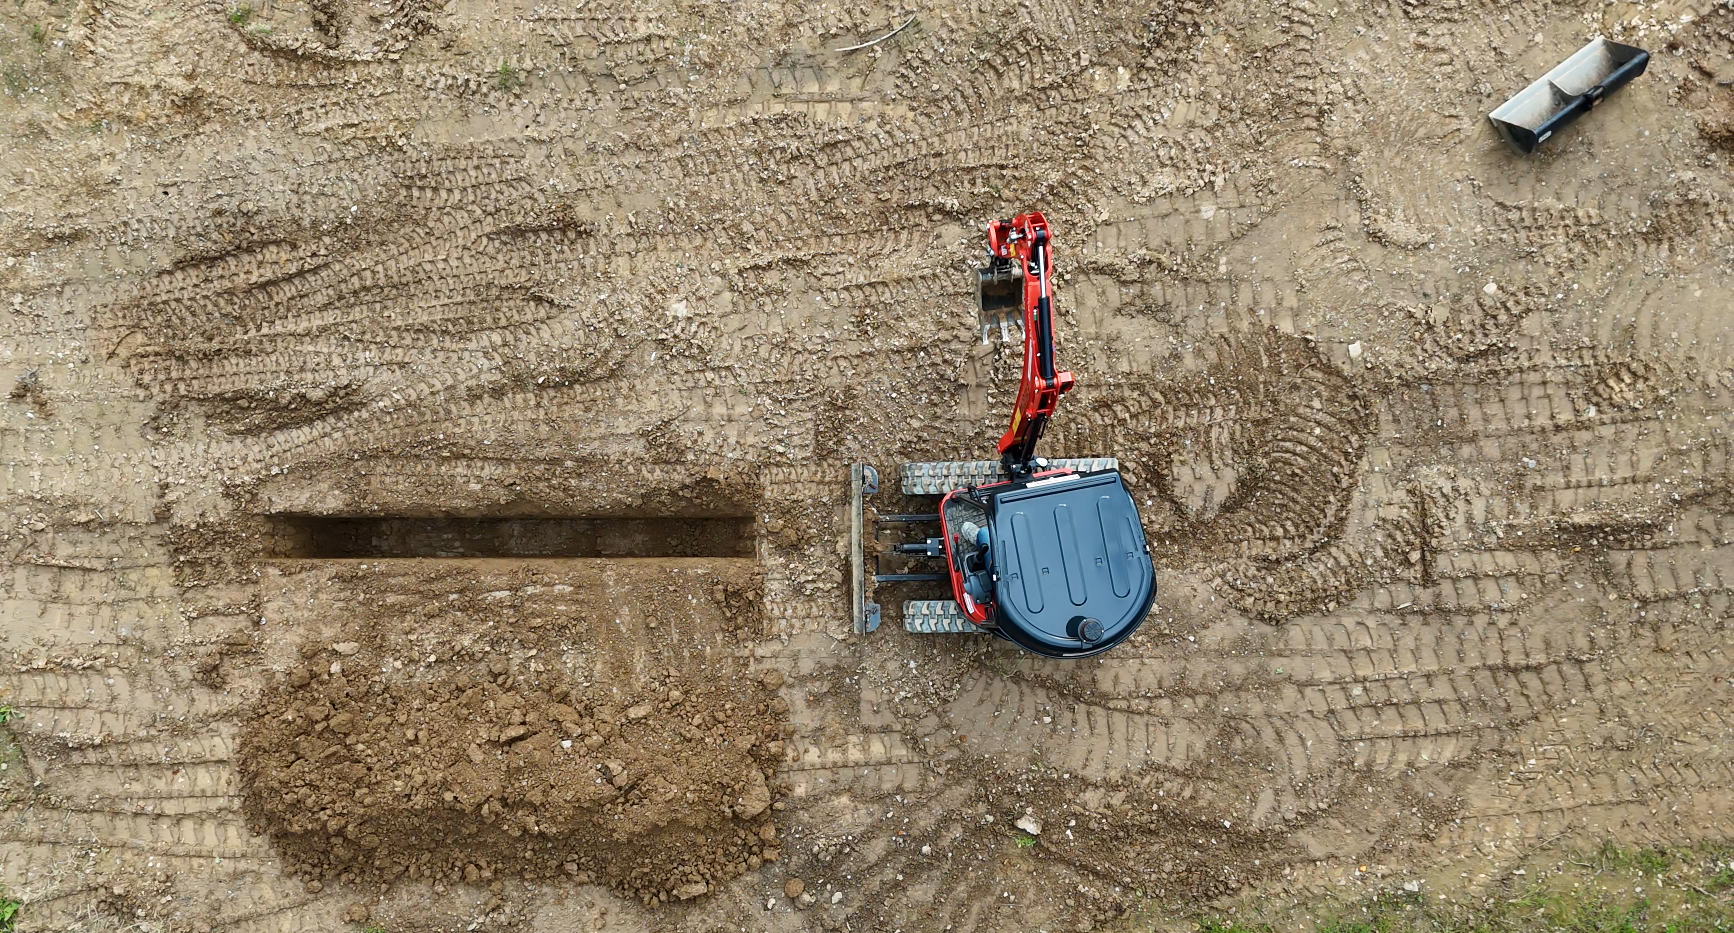 bird's eye view of an excavator digging a trench